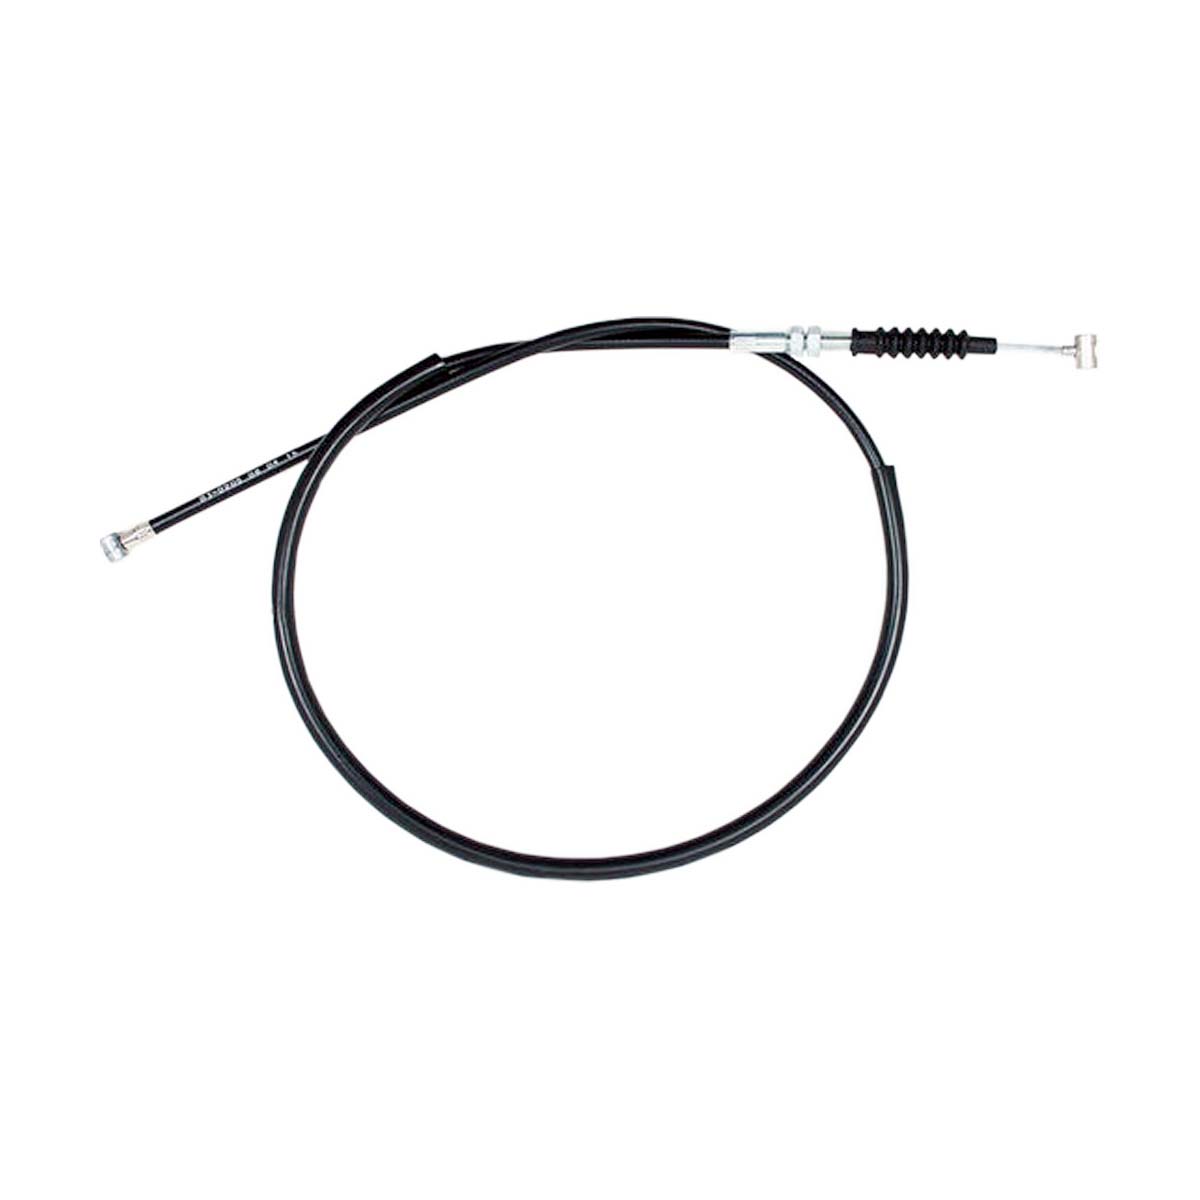 Extended Brake Cable - KLX110 (non L)